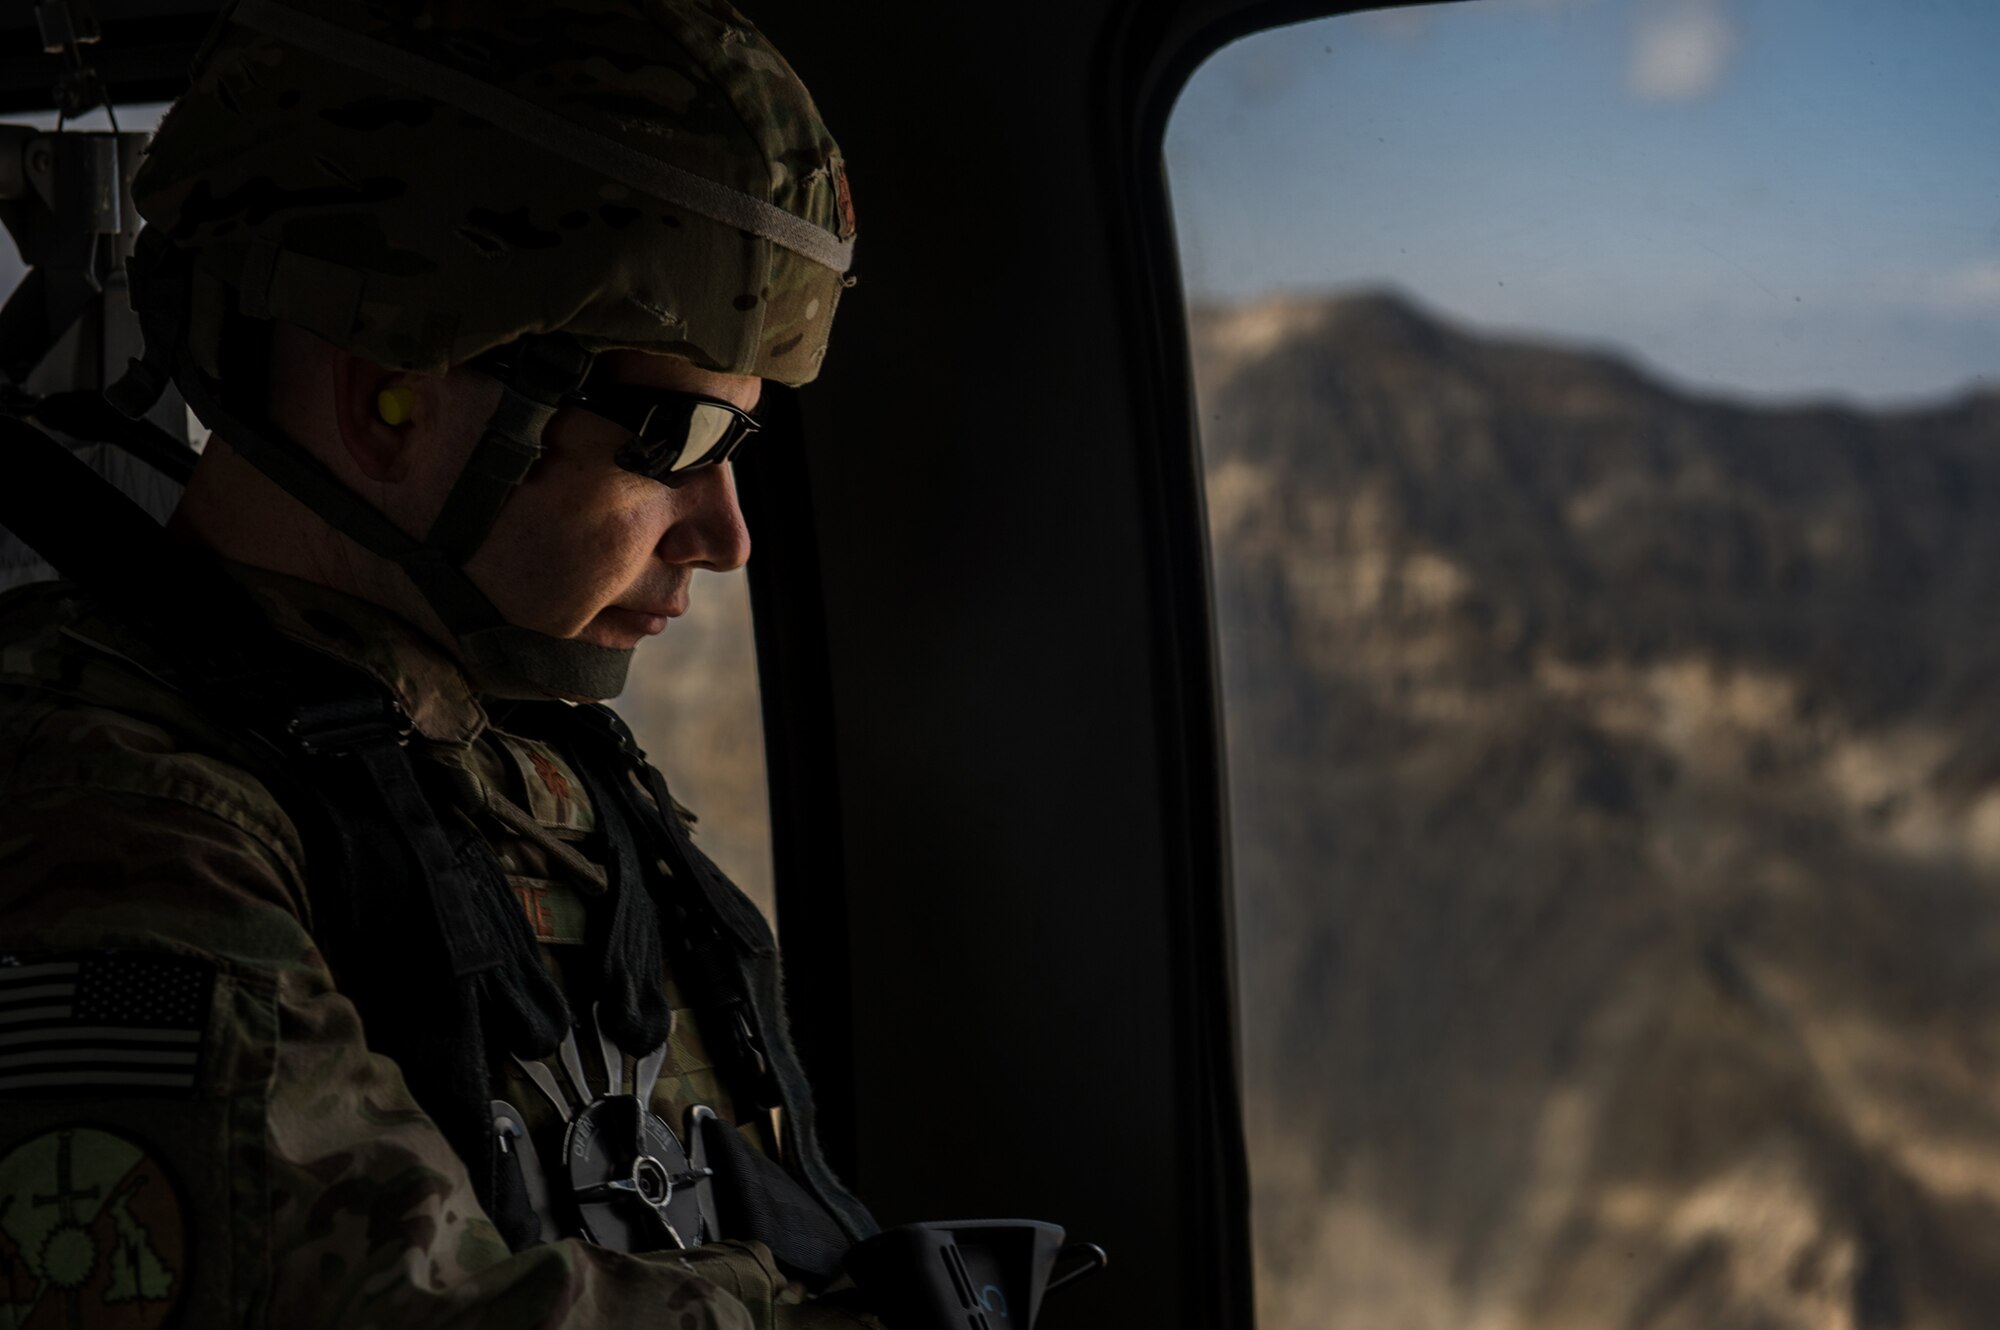 U.S. Air Force Maj. Ryan Kehoe, 19th Expeditionary Weather Squadron, director of operations, travels on a U.S. Army UH-60 Black Hawk back to Bagram Airfield after visiting with 19th EWS Airmen at remote forward operating bases on Oct. 16, 2012, over Afghanistan. The 19th EWS provides Army ground commanders with accurate and real-time weather conditions and offers alternative options to help commanders make informed decisions on combat operations. (U.S. Air Force photo/Staff Sgt. Jonathan Snyder)